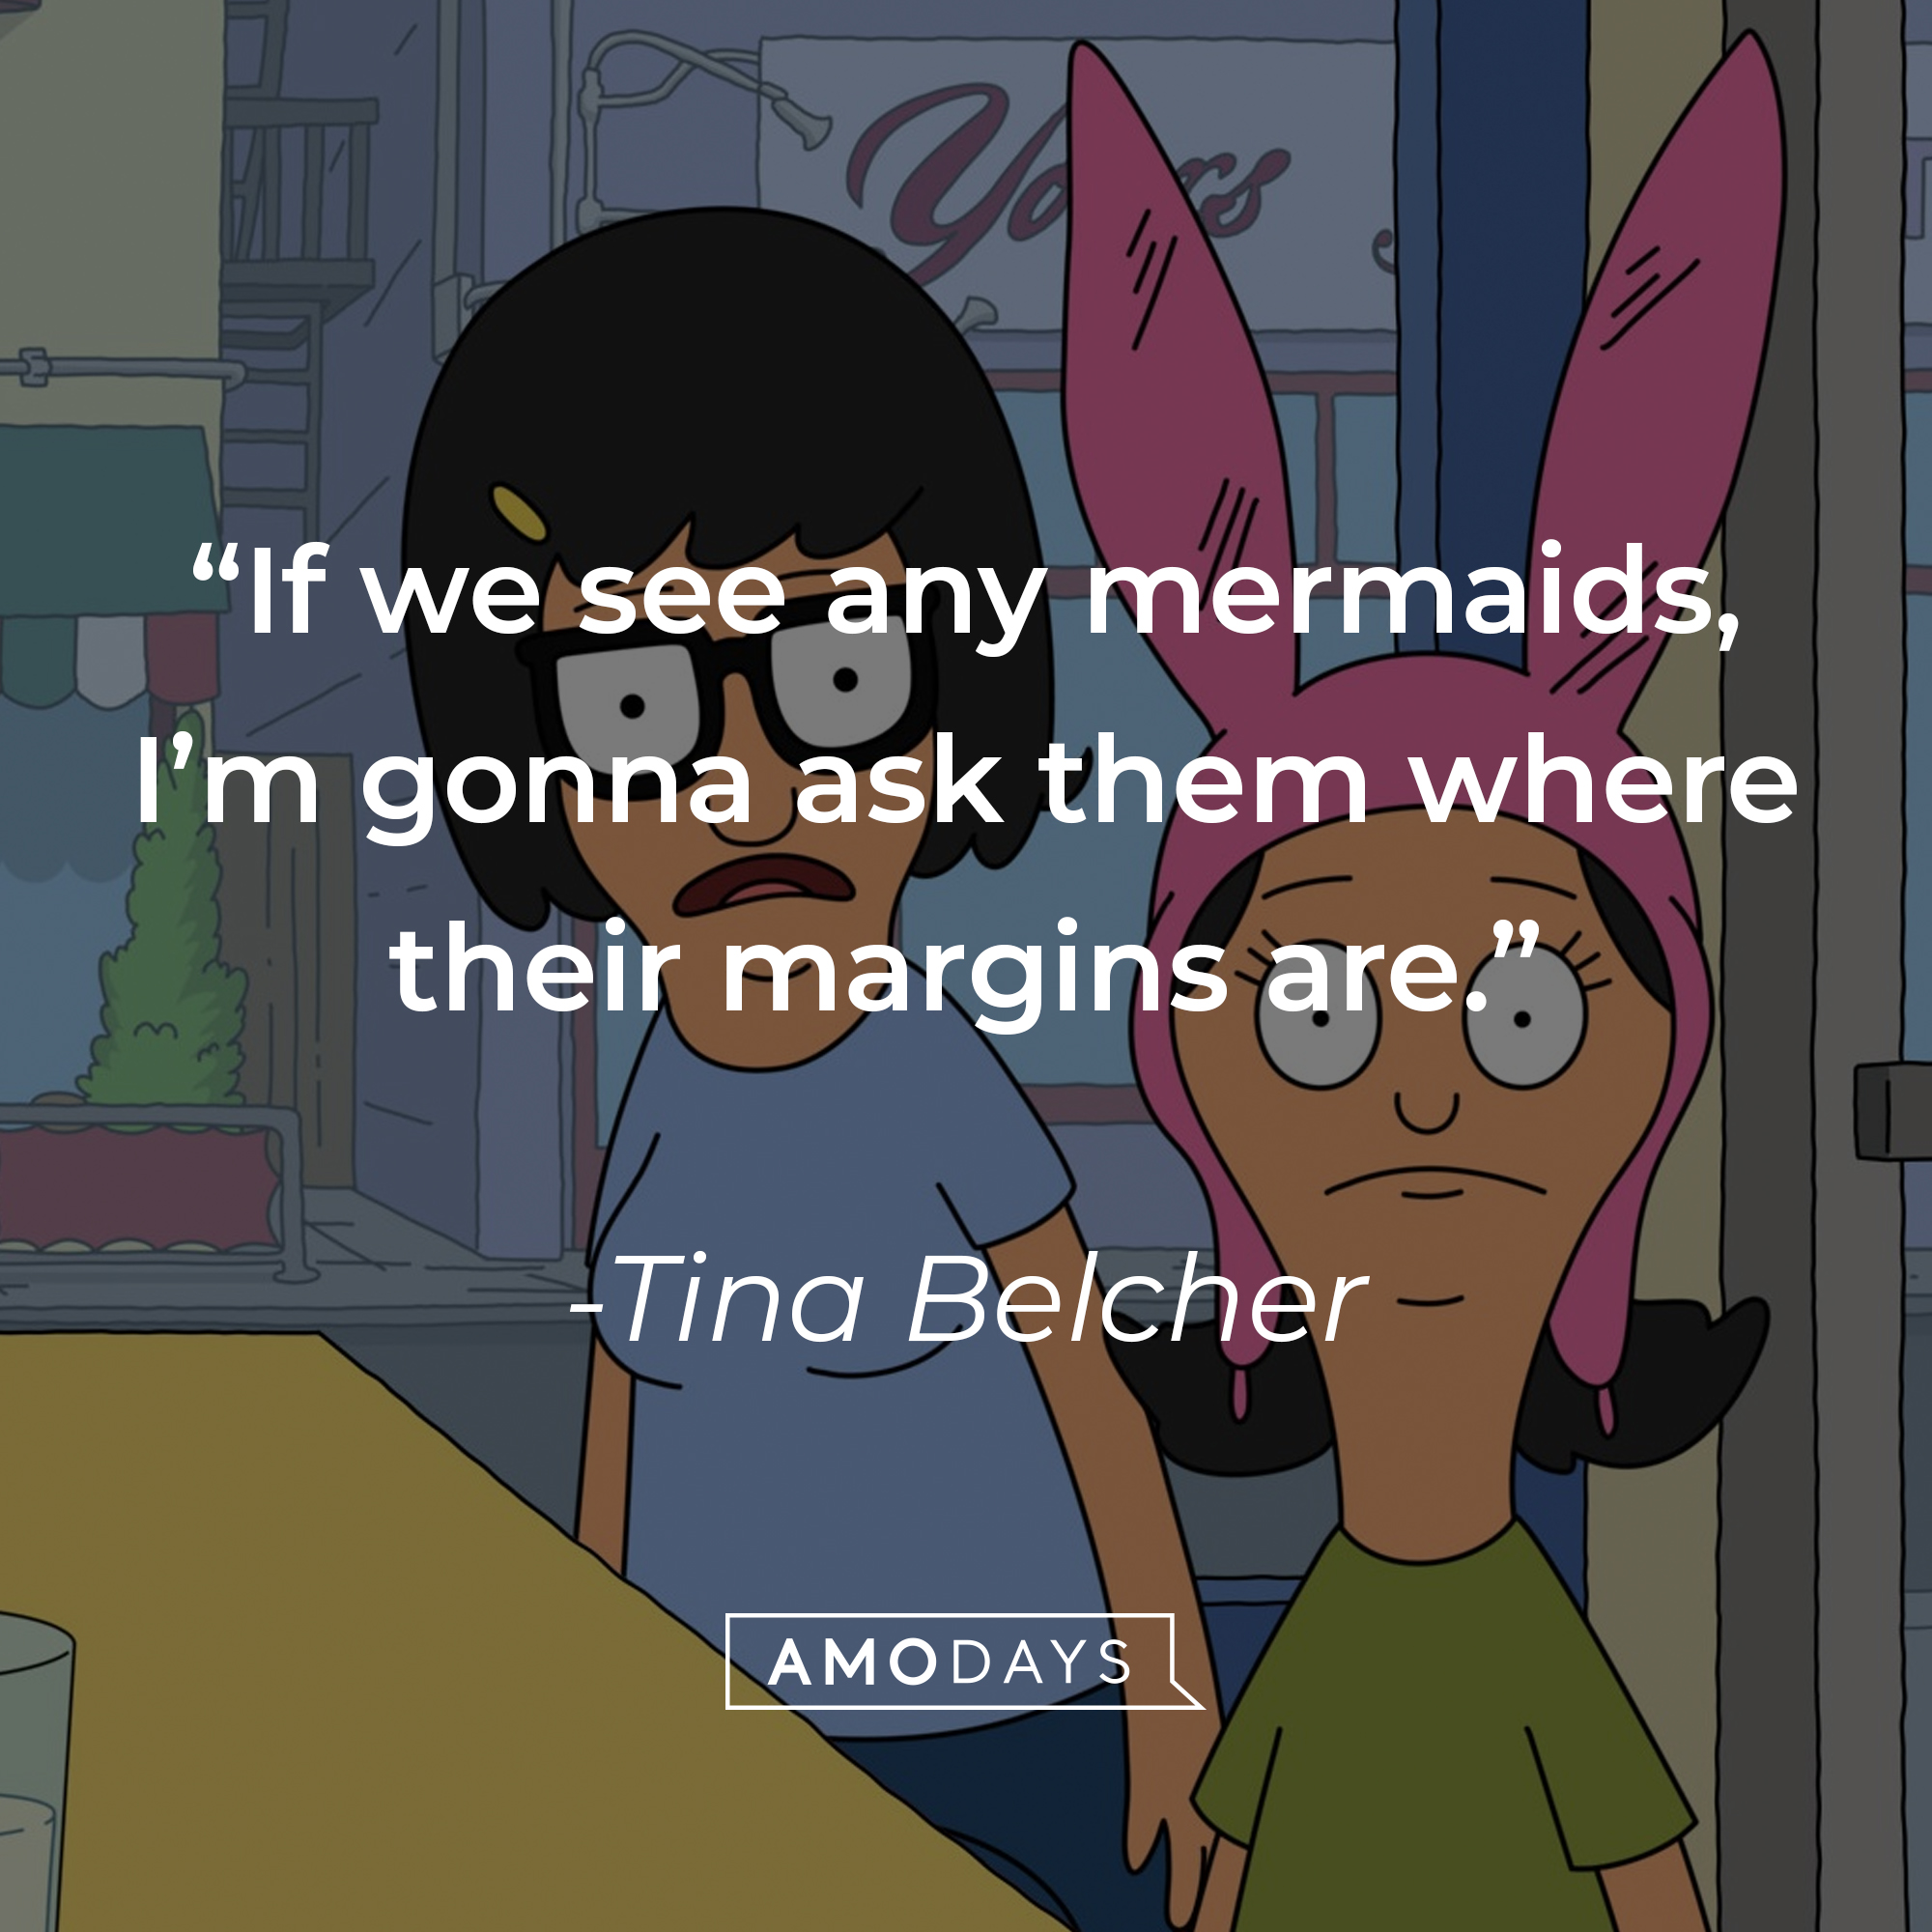 An Image of Tina Belcher and Louise from “Bob’s Burgers” with Belcher’s quote: “Dad, I need you to drop everything and shave my legs.” | Source: Facebook.com/BobsBurgers